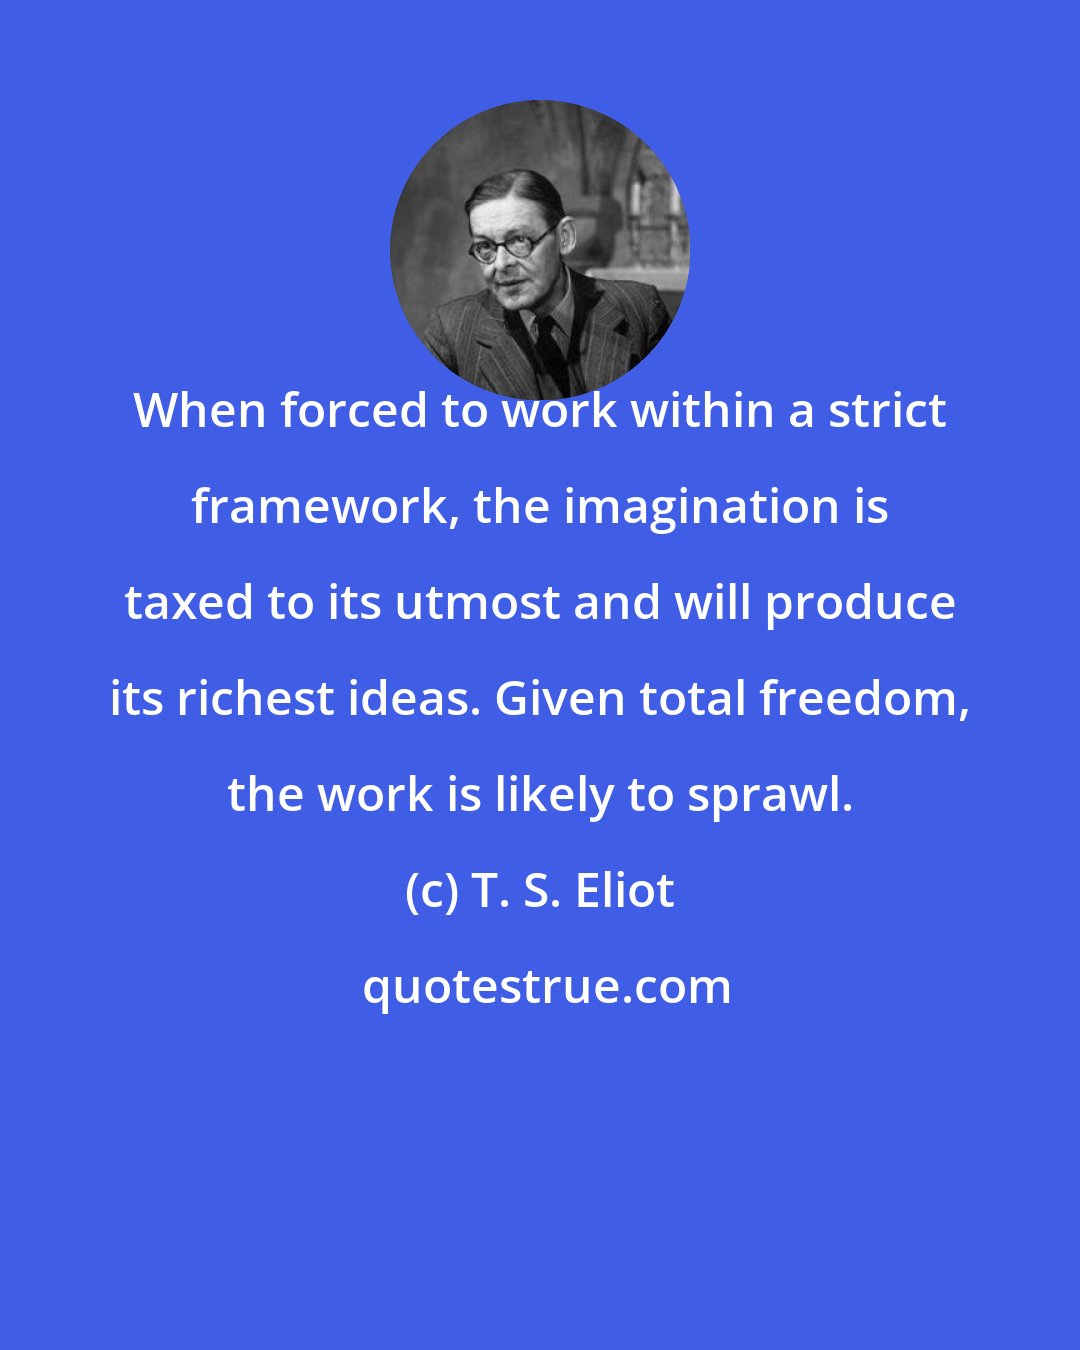 T. S. Eliot: When forced to work within a strict framework, the imagination is taxed to its utmost and will produce its richest ideas. Given total freedom, the work is likely to sprawl.